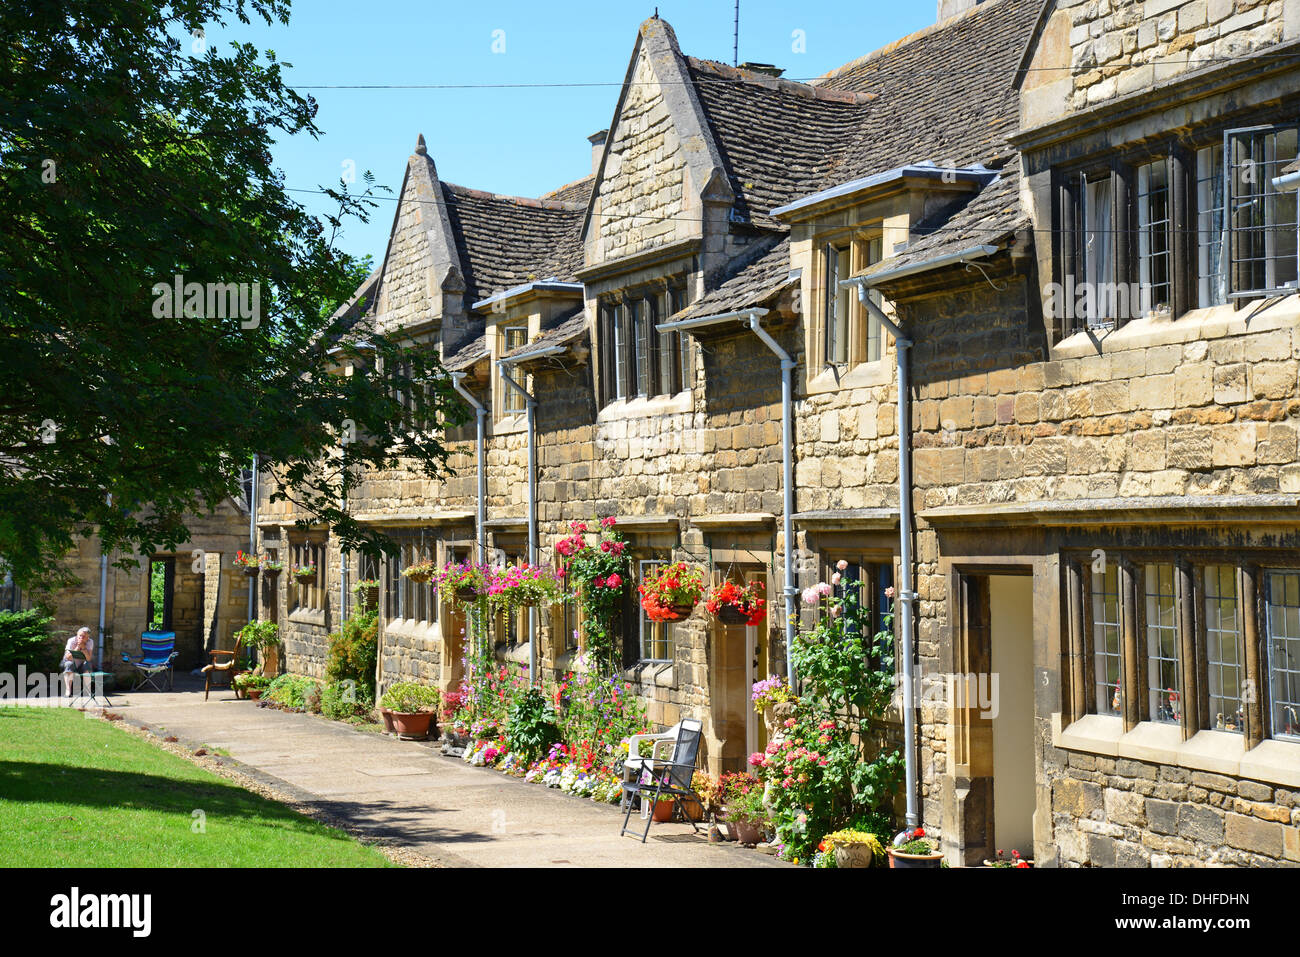 L'hôpital de lord Burghley, Station Road, Stamford, Lincolnshire, Angleterre, Royaume-Uni Banque D'Images